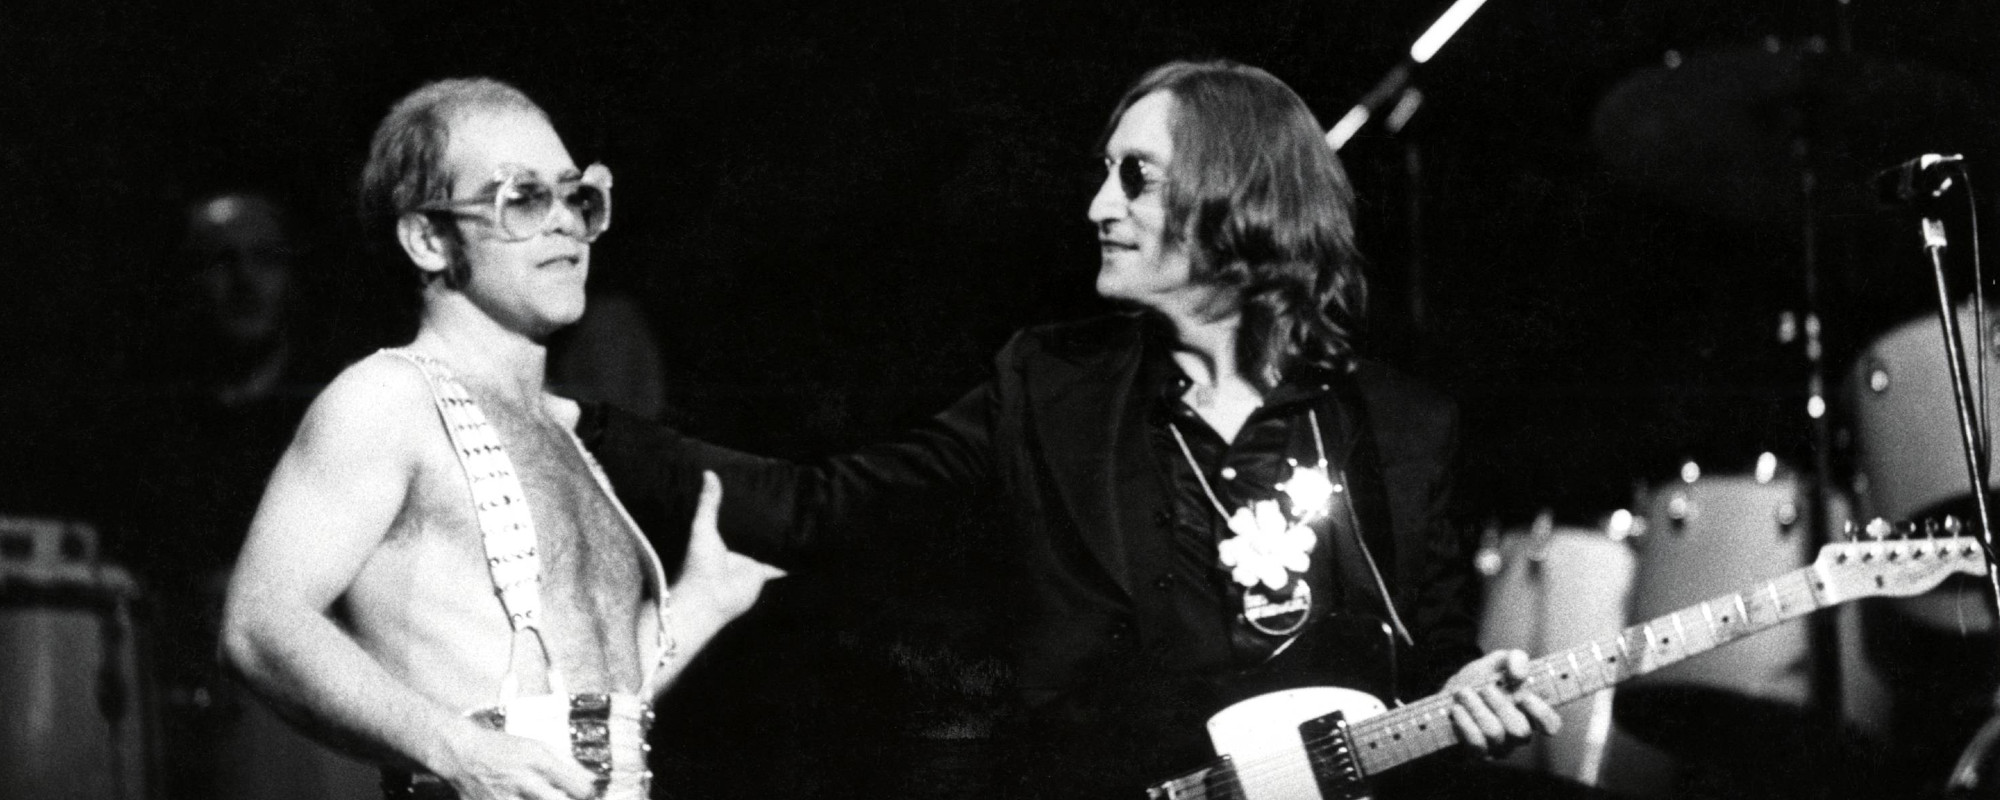 Remember When: John Lennon Gave His Last Live Performance After Losing a Wager to Elton John